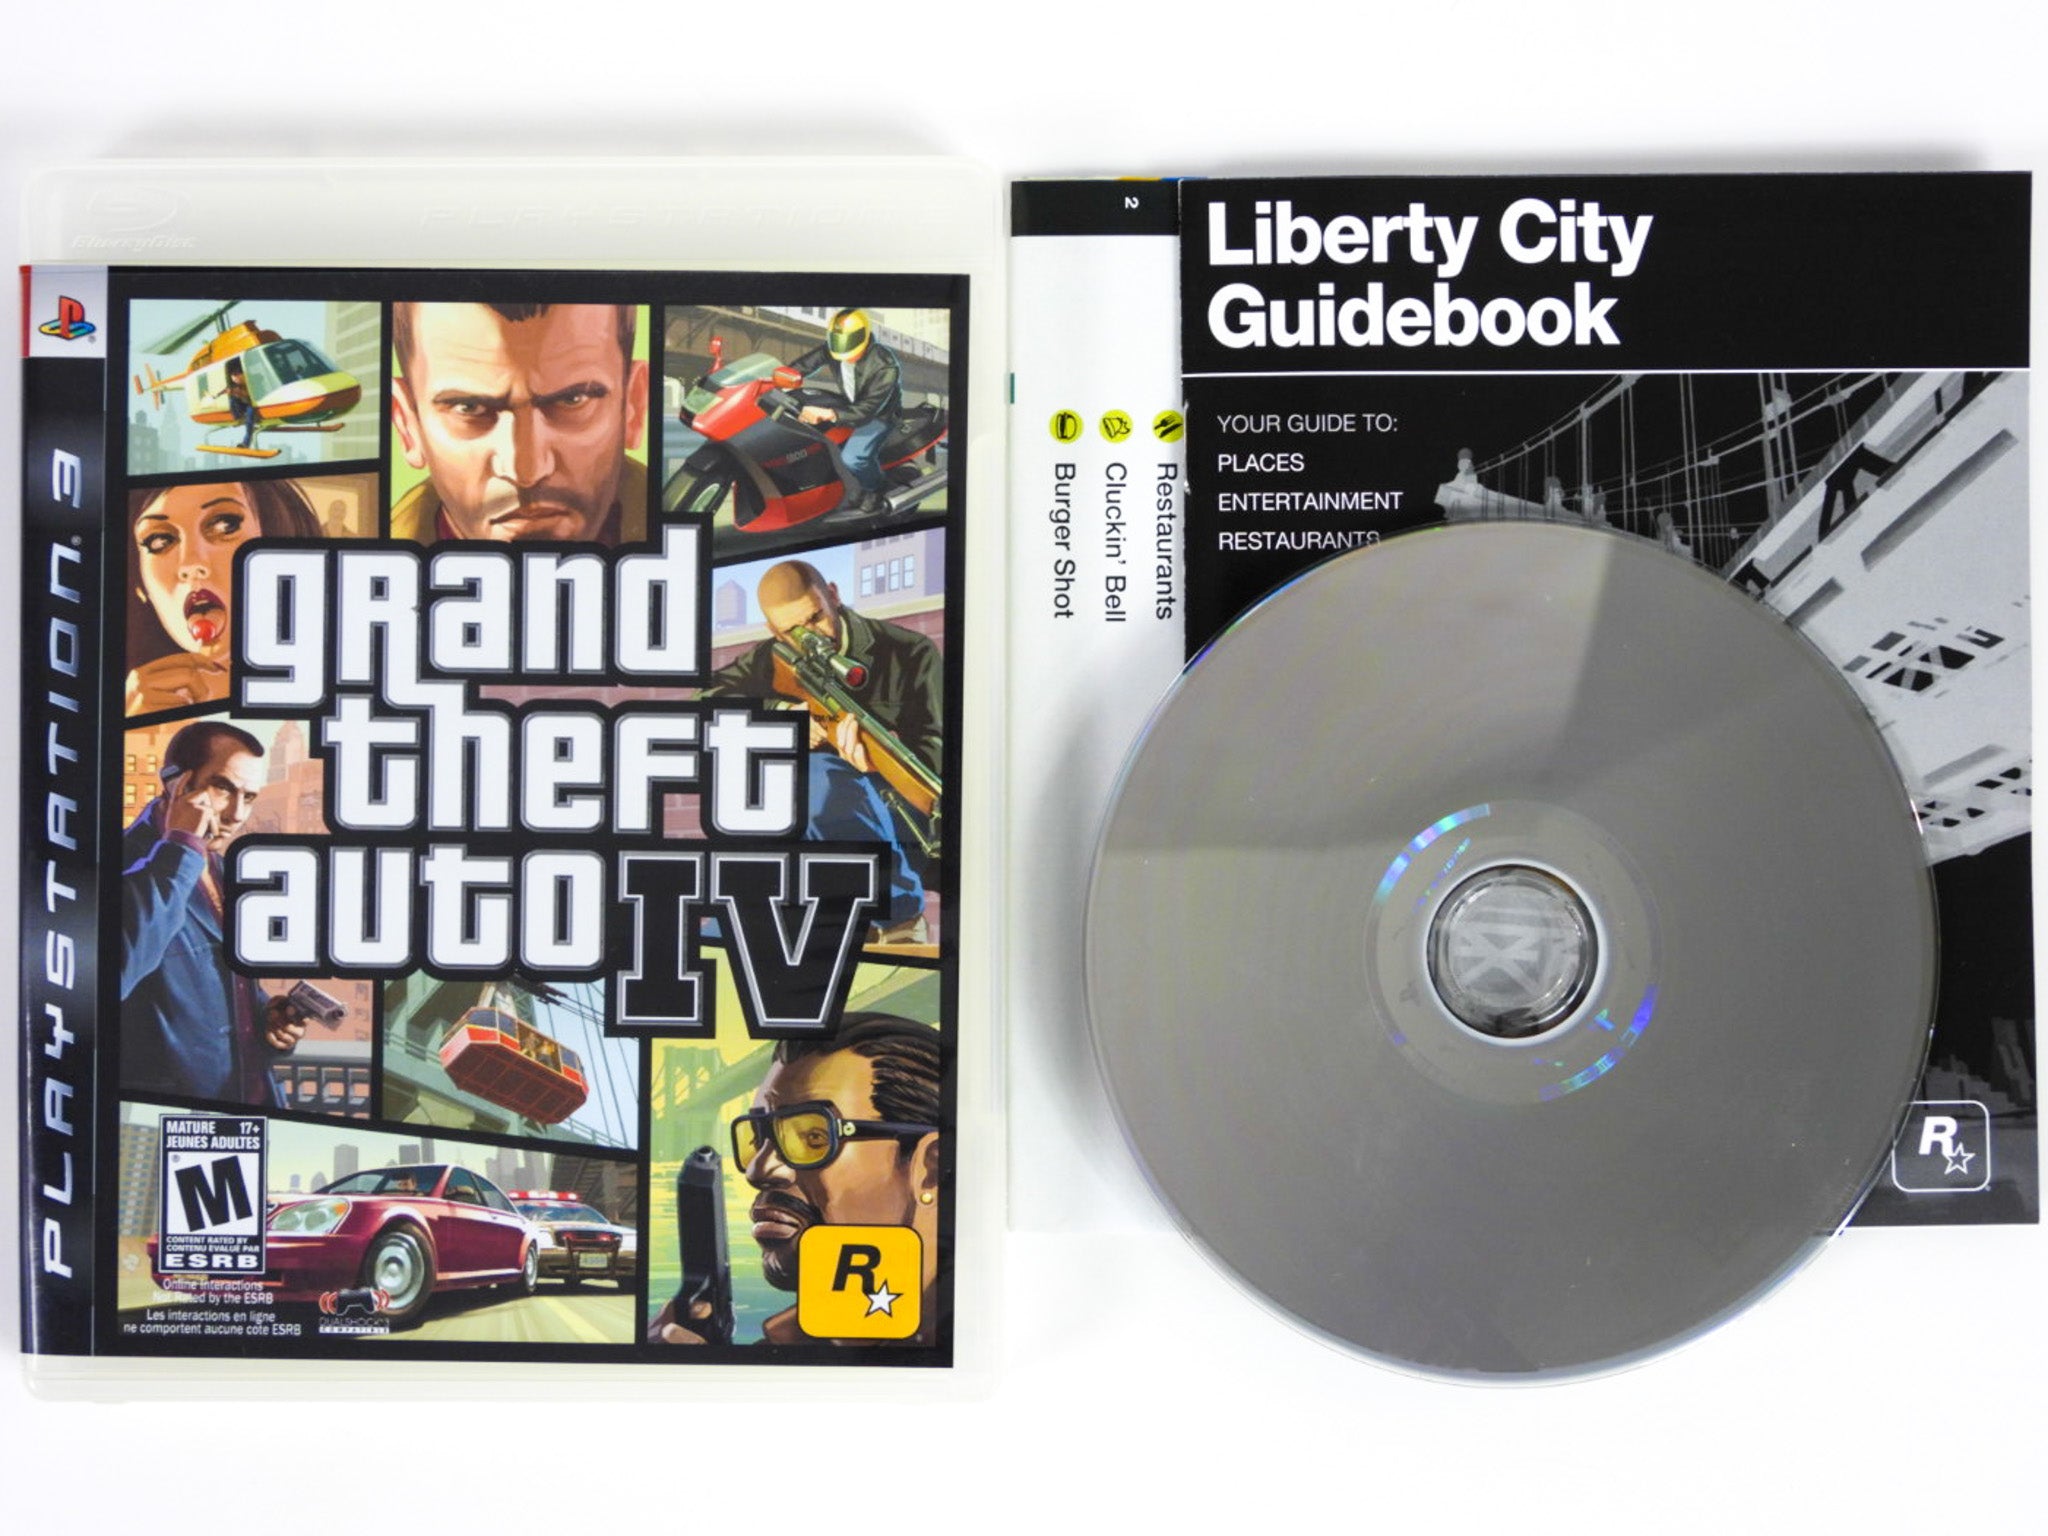 Grand Theft Auto IV Special Edition - PlayStation 3